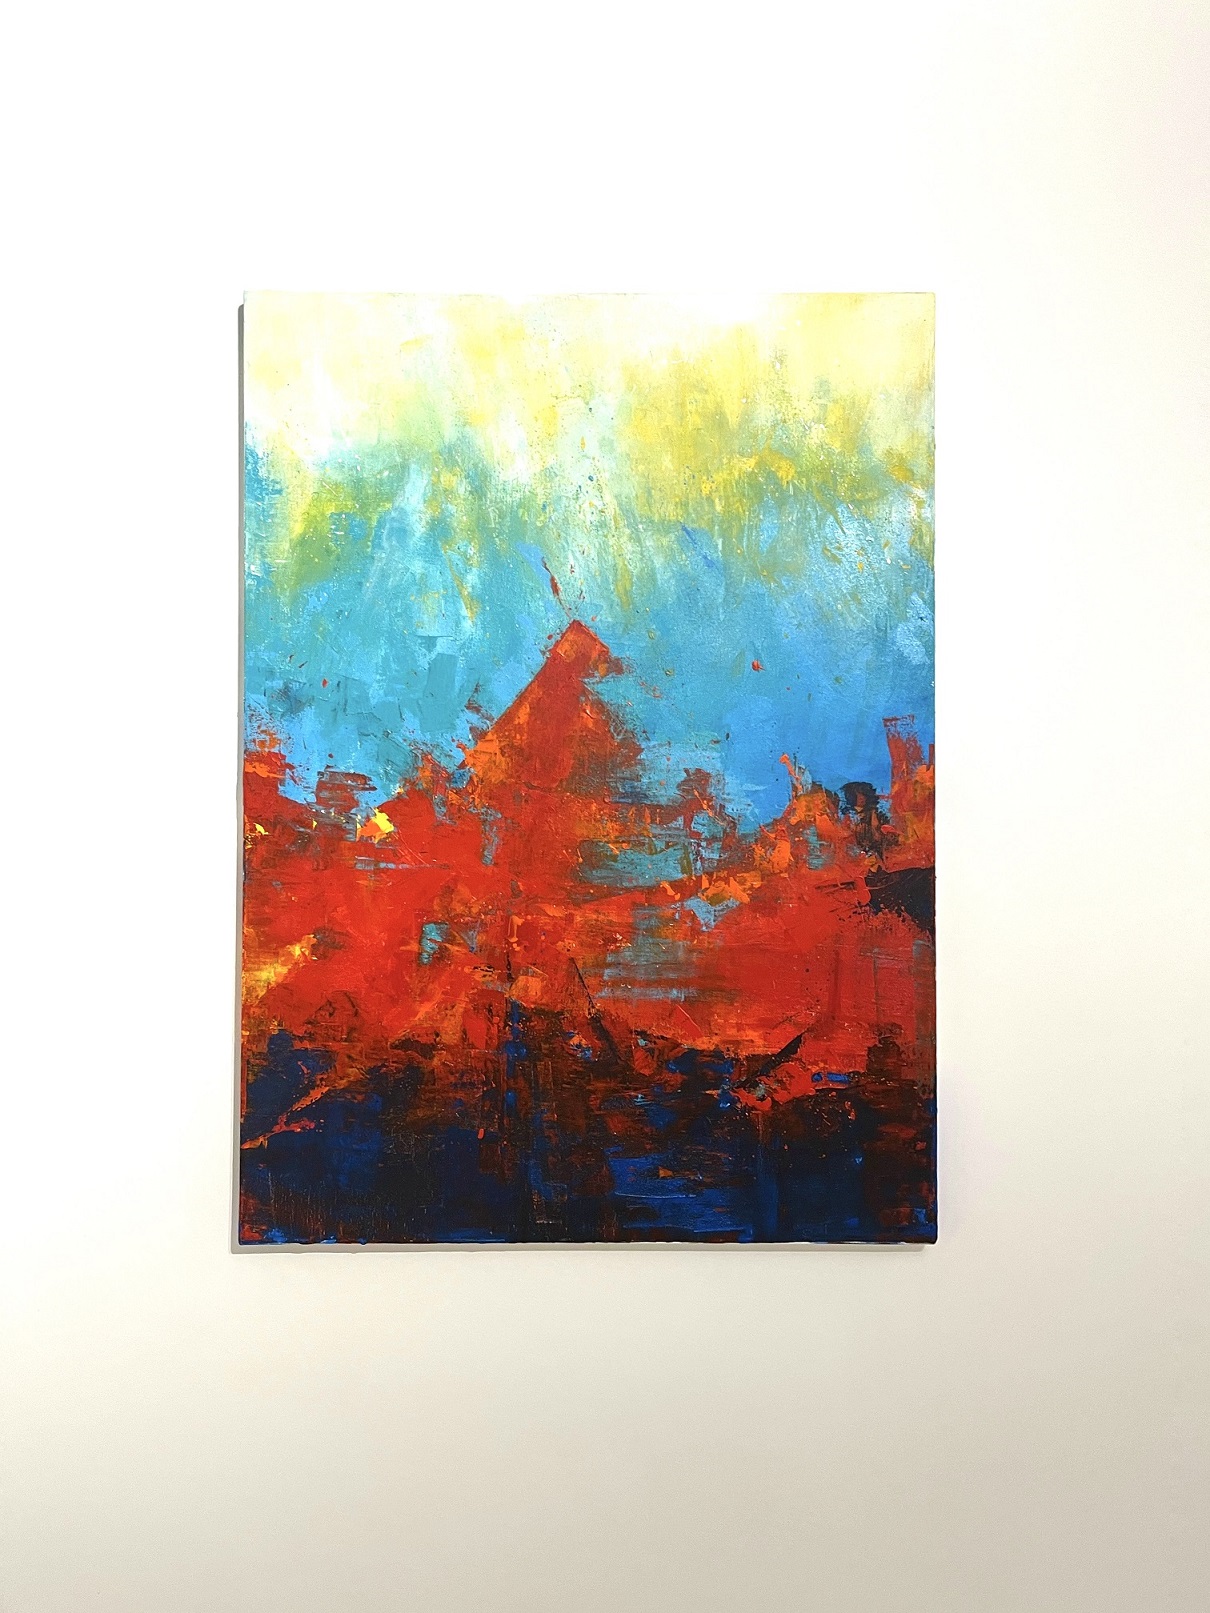 A captivating abstract artwork in vibrant hues of blue and red, with a rising composition that symbolizes growth, passion, and transformation